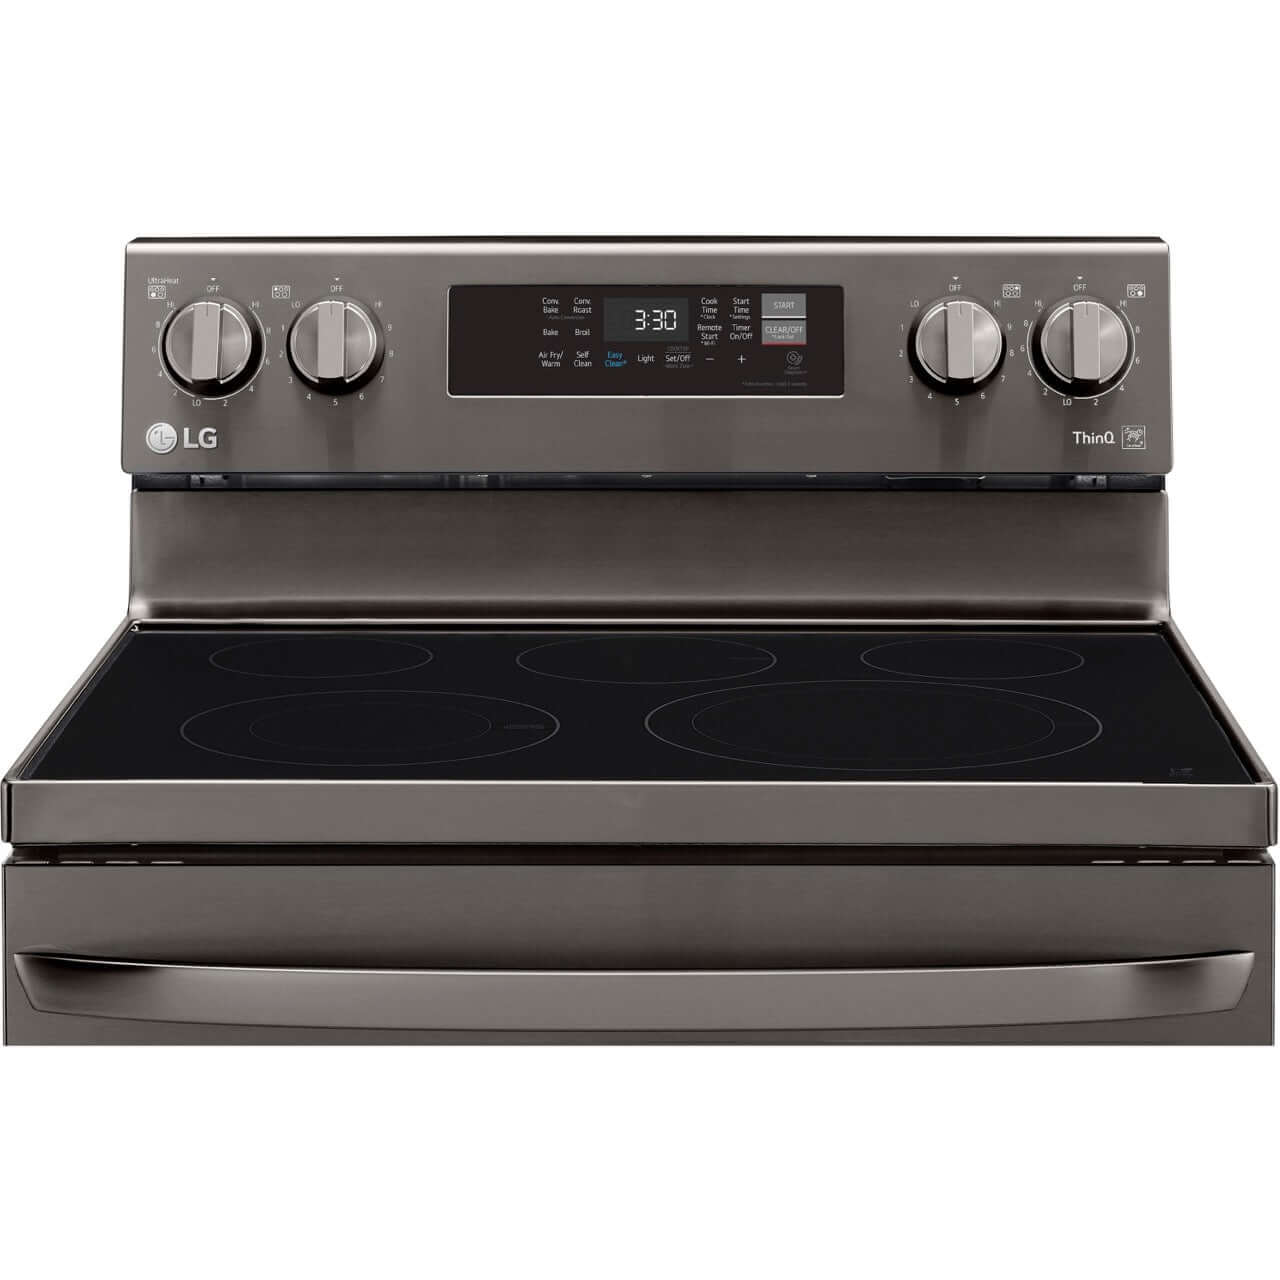 LG 6.3-Cu. Ft. Electric Smart Range with EasyClean and AirFry Black Stainless Steel (LREL6323D)